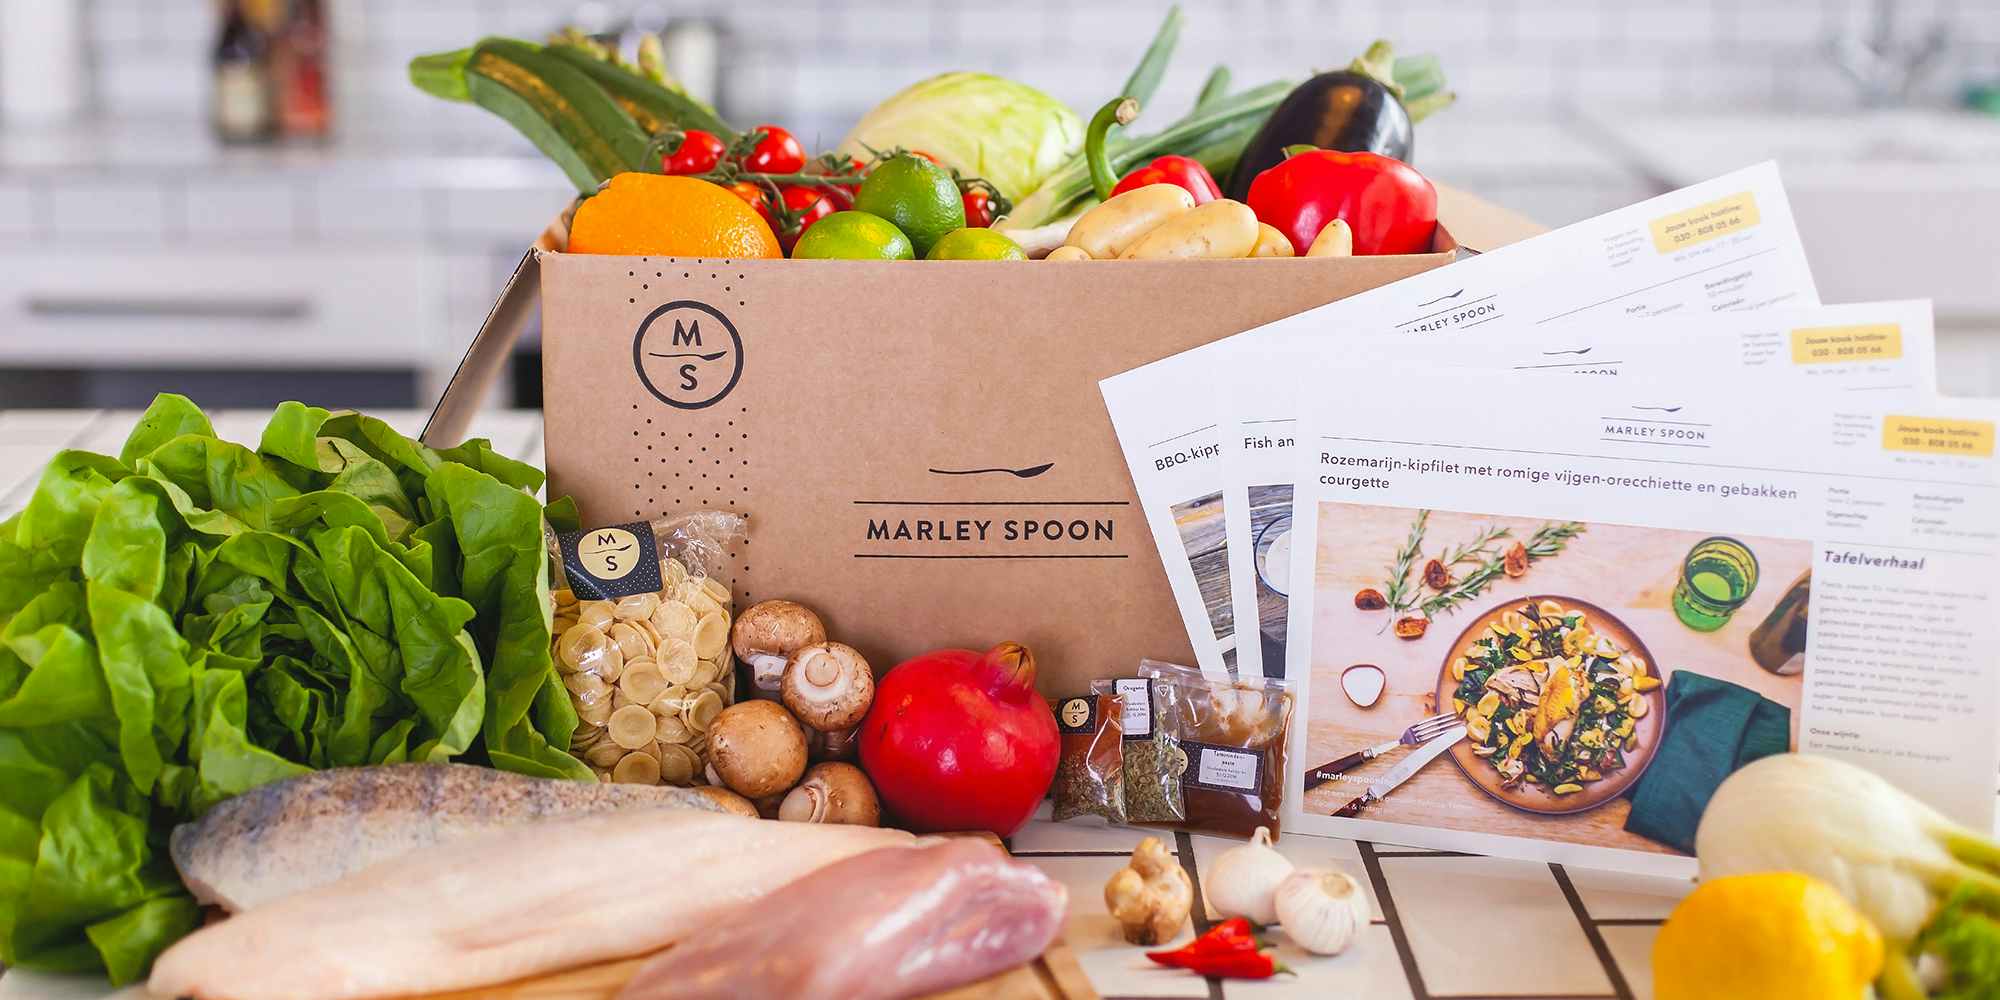 Marley Spoon New User Offer: Get 24 Dinners for Only $4.99 Each